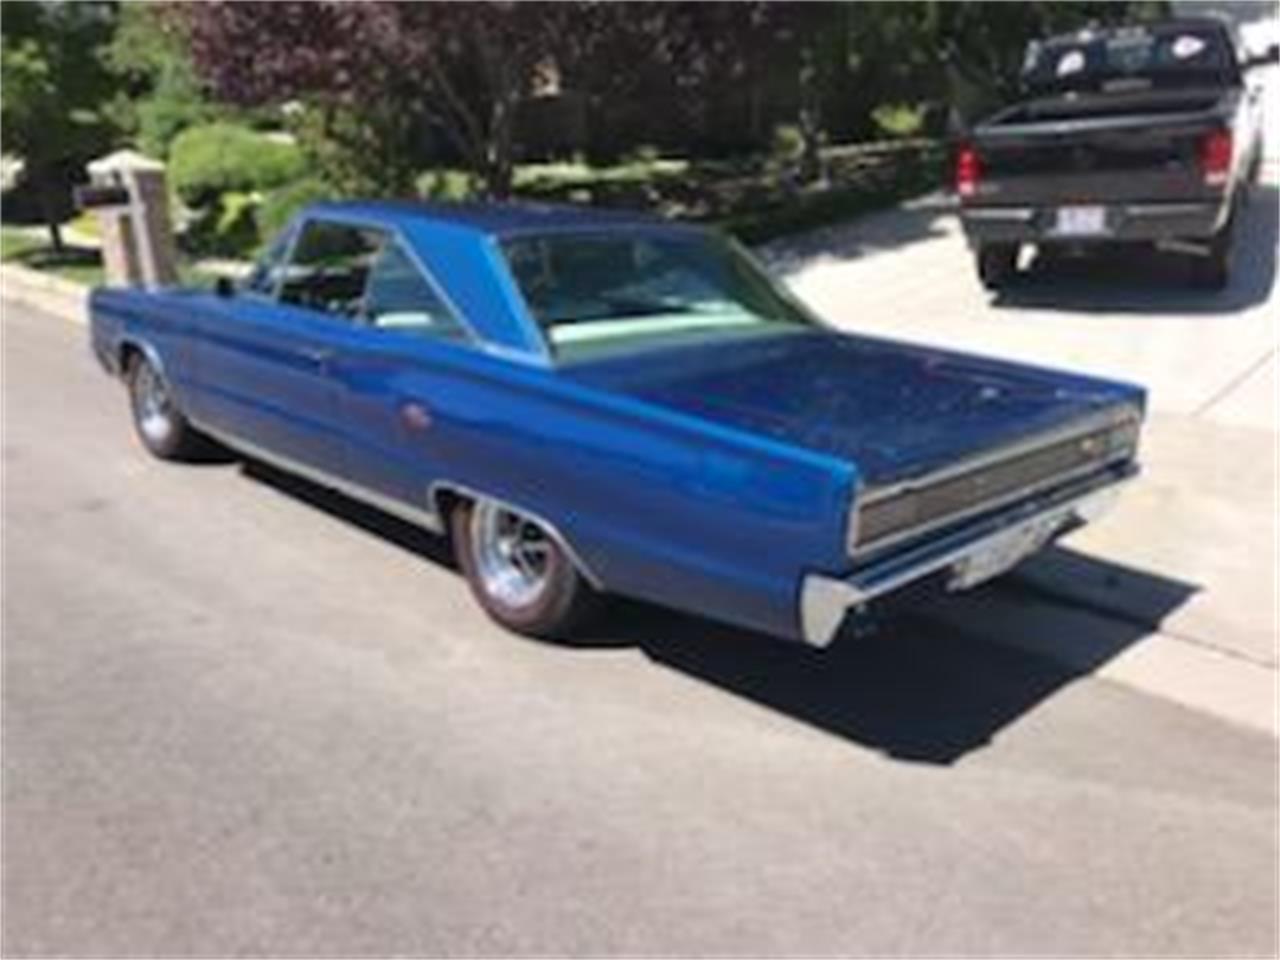 For Sale at Auction: 1967 Dodge Coronet for sale in Billings, MT